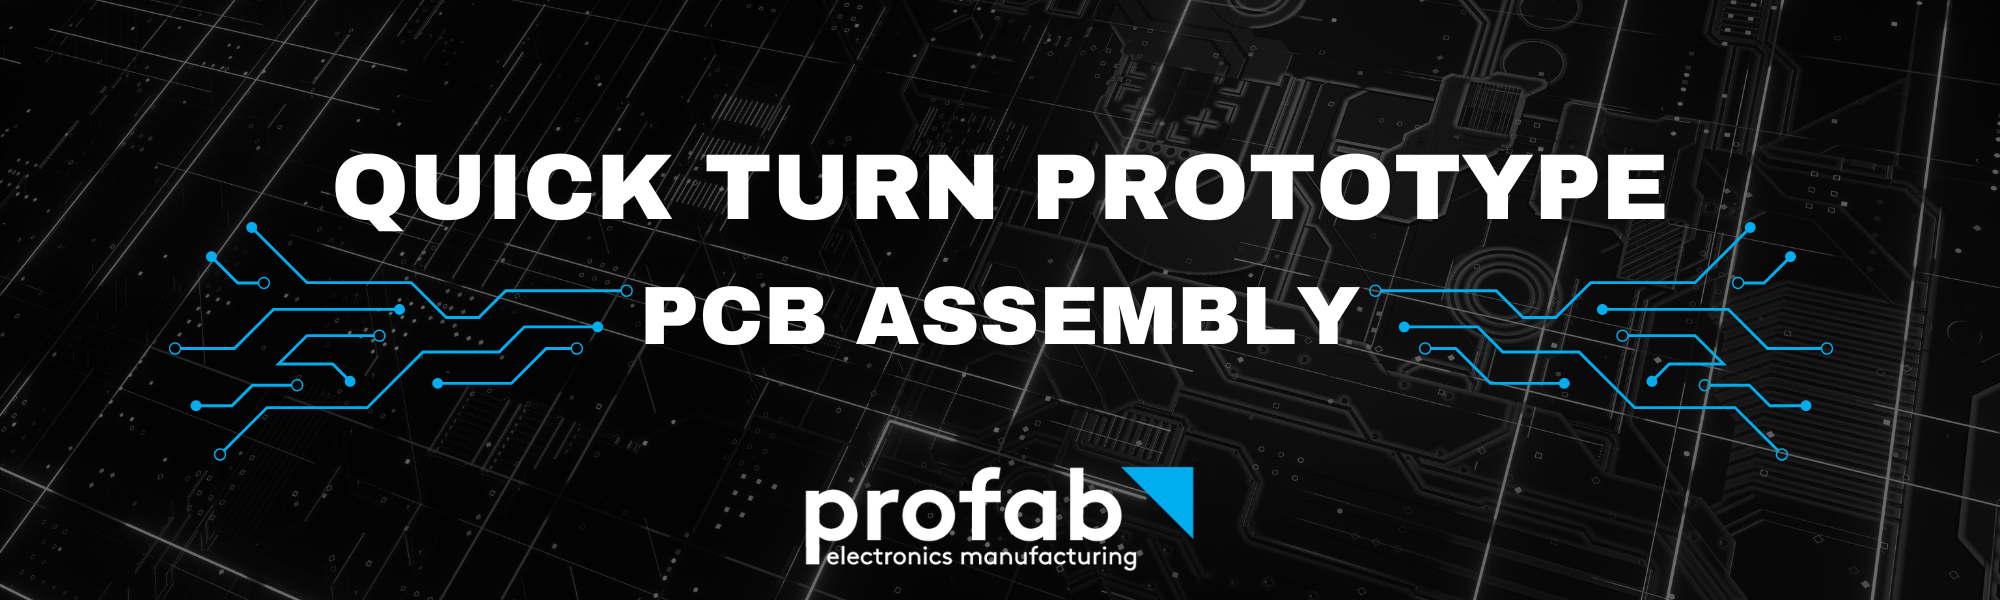 Quick Turn Prototype PCB Assembly